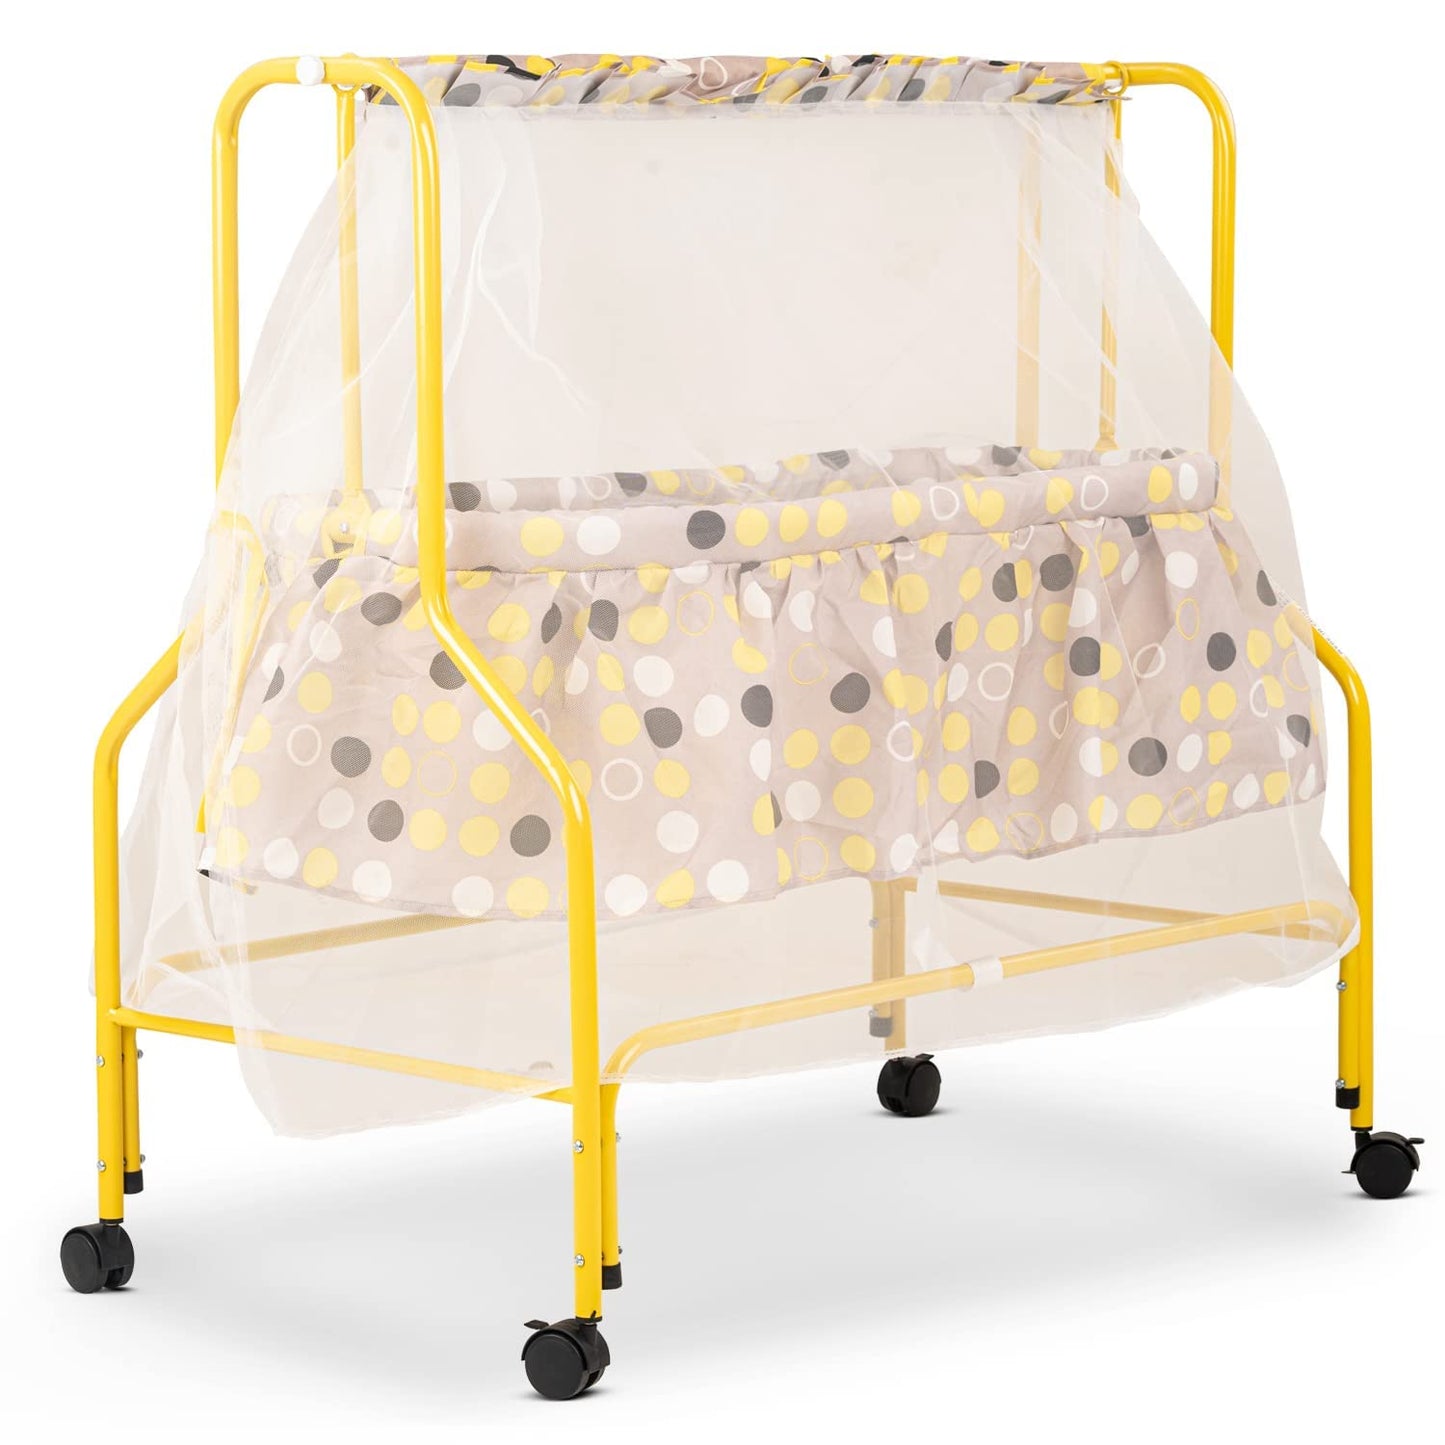 BAYBEE Enchant Baby Swing Cradle for Baby with Mosquito Net for 0 to 12 Month Boys Girls (Yellow)